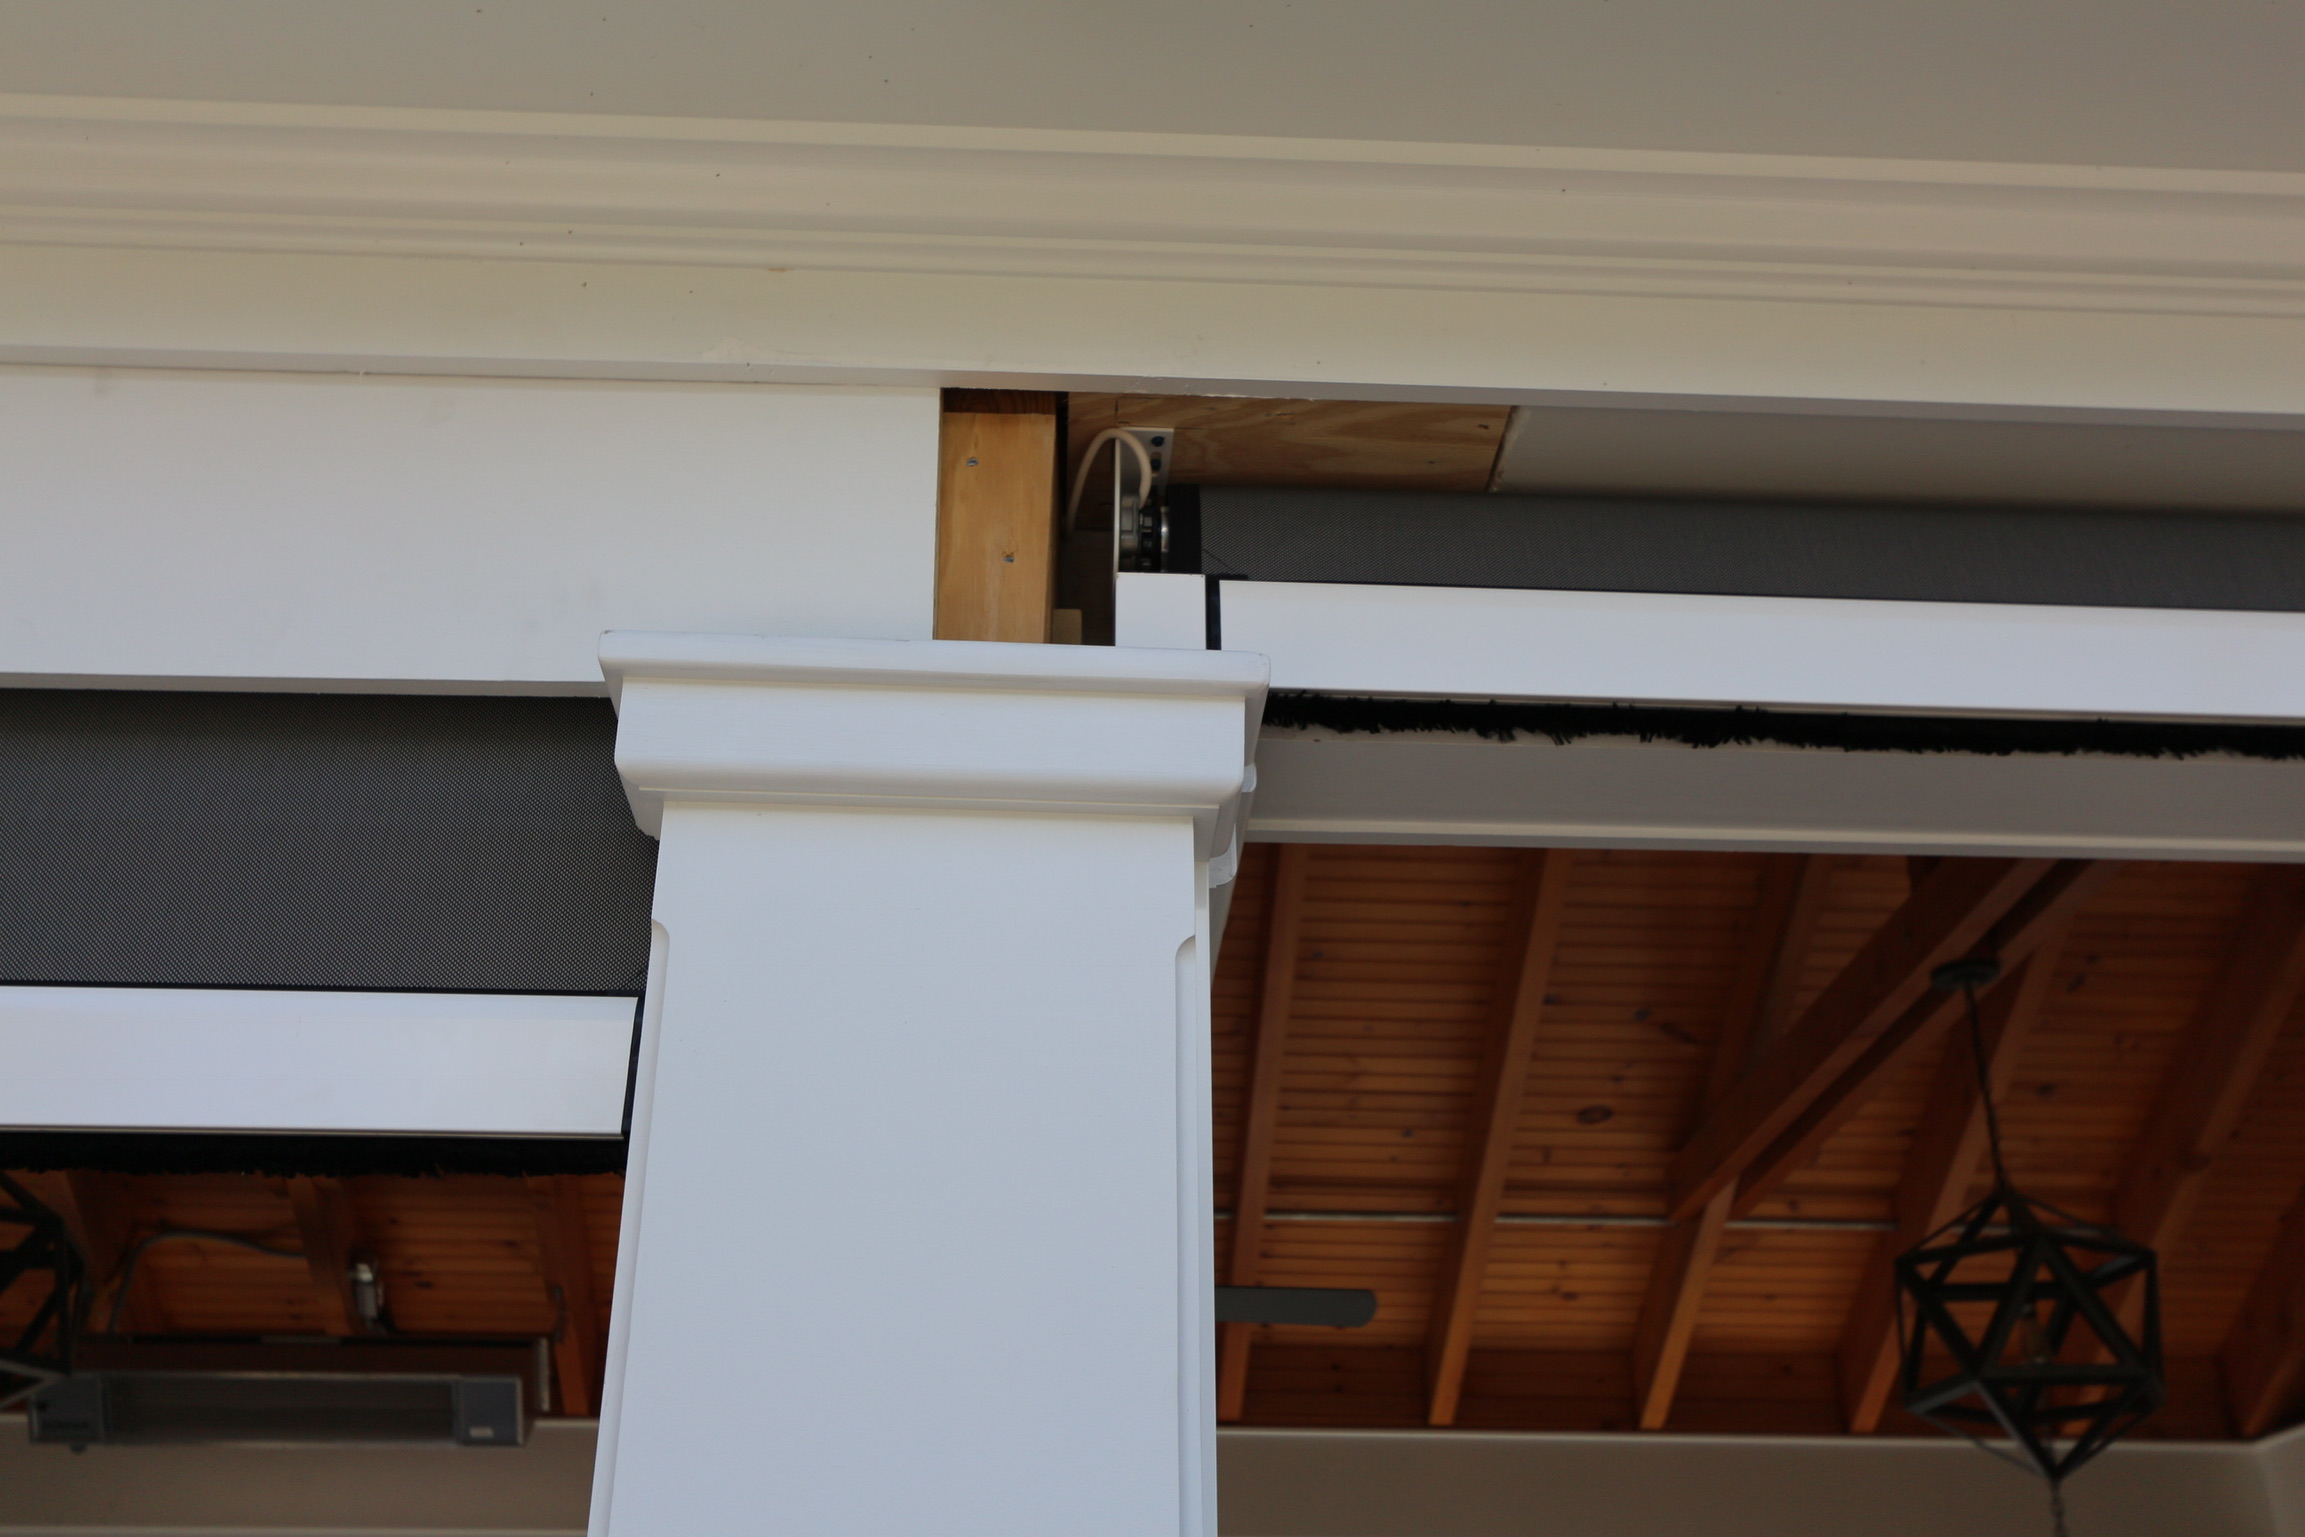 Rainier outdoor shades headrail installed in the cavity of pavilion